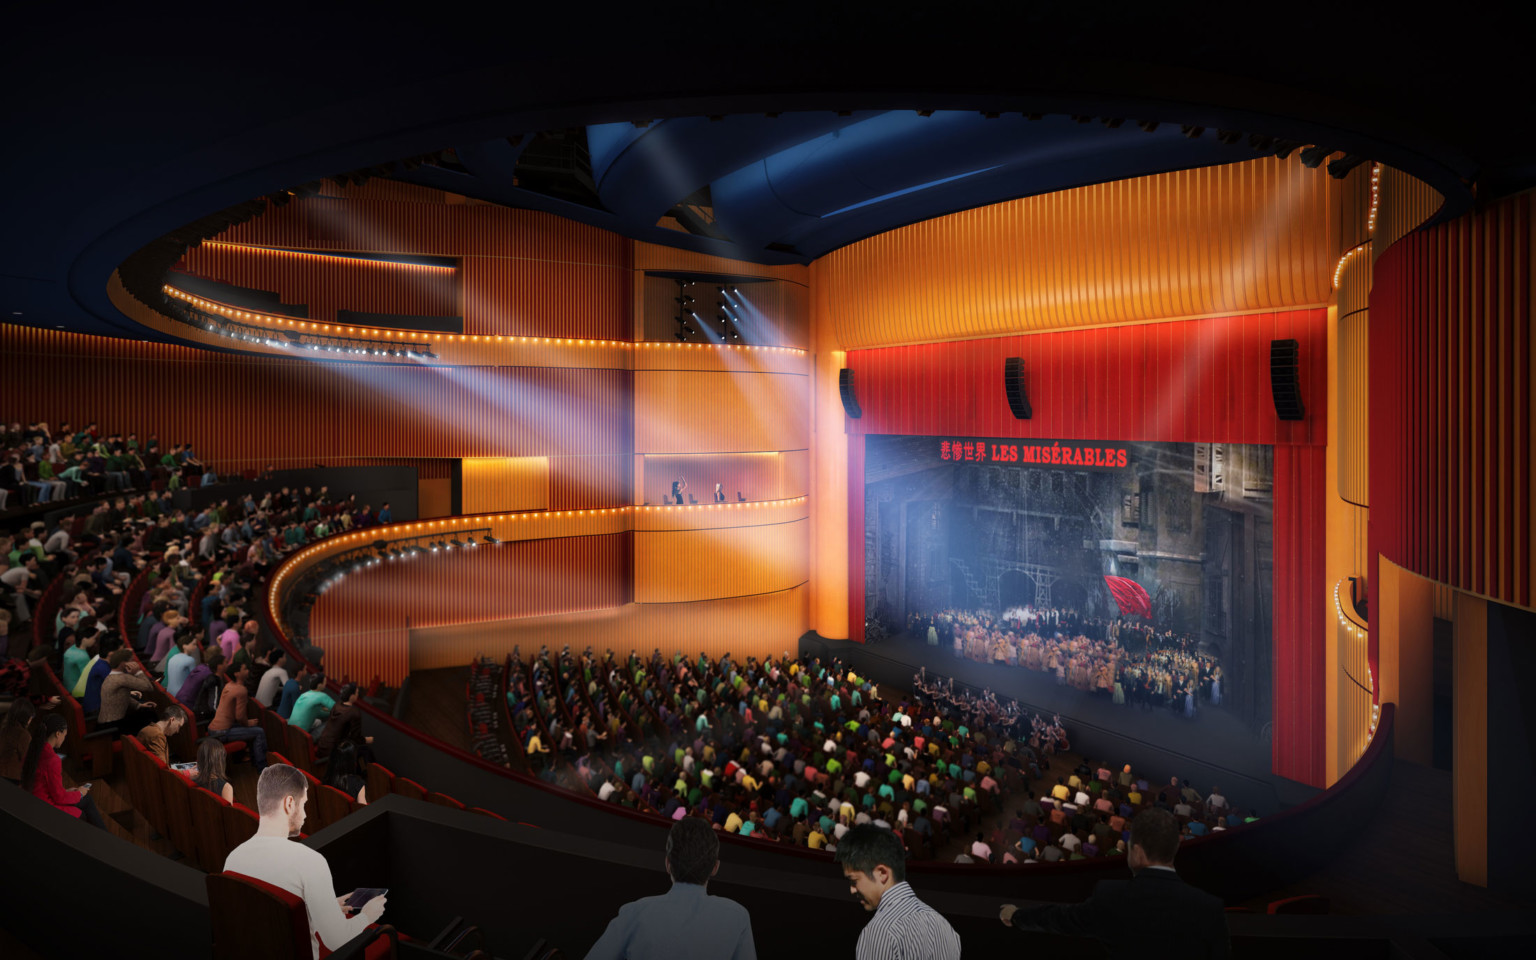 Balcony view of concept for North Bund Theater with audience watching a performance of Les Miserables in wood panel theater